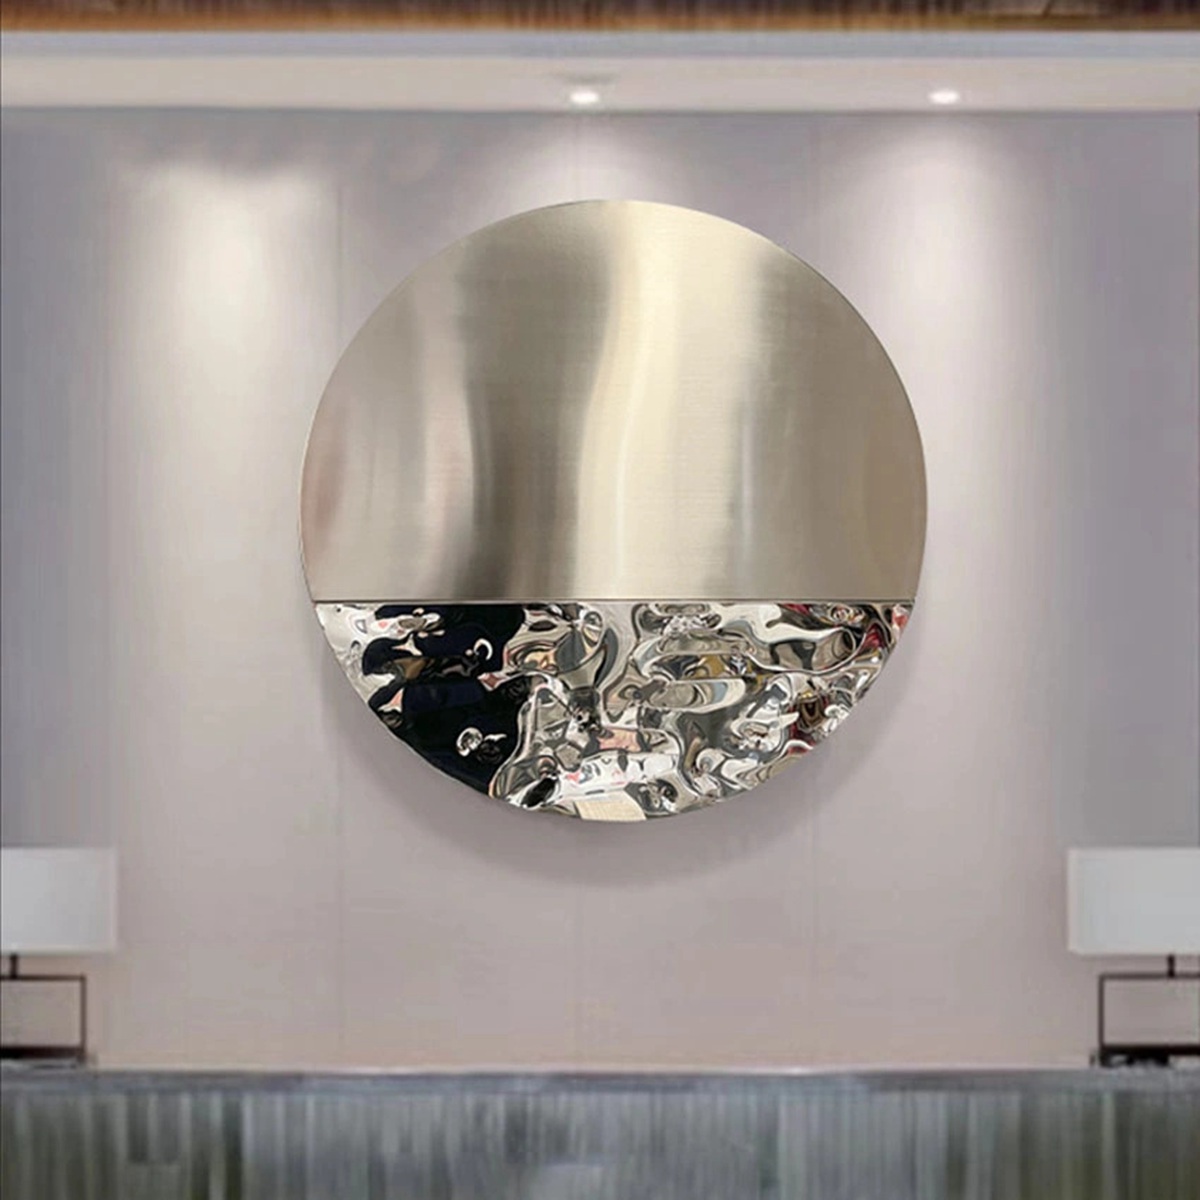 Stainless Steel Wall Sculpture (4)